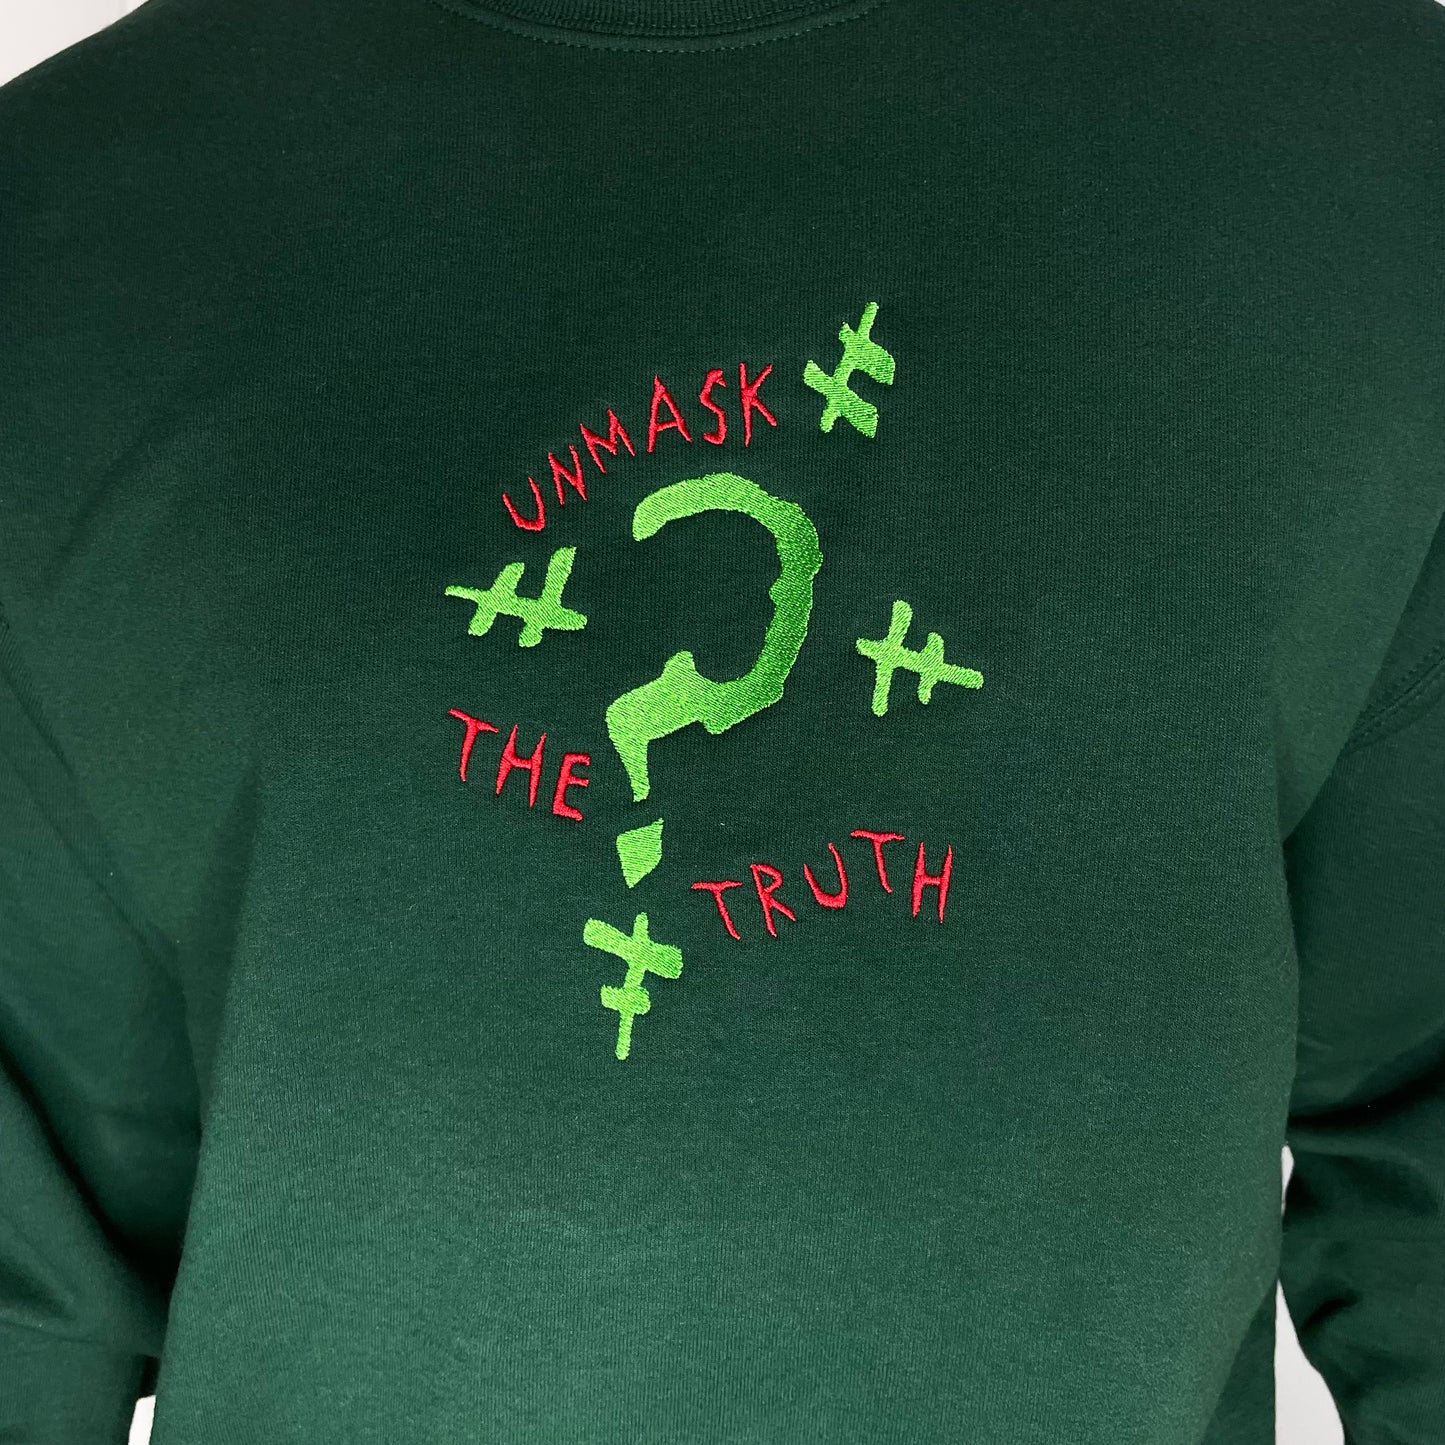 The Riddler "Unmask the Truth" Embroidered Crewneck